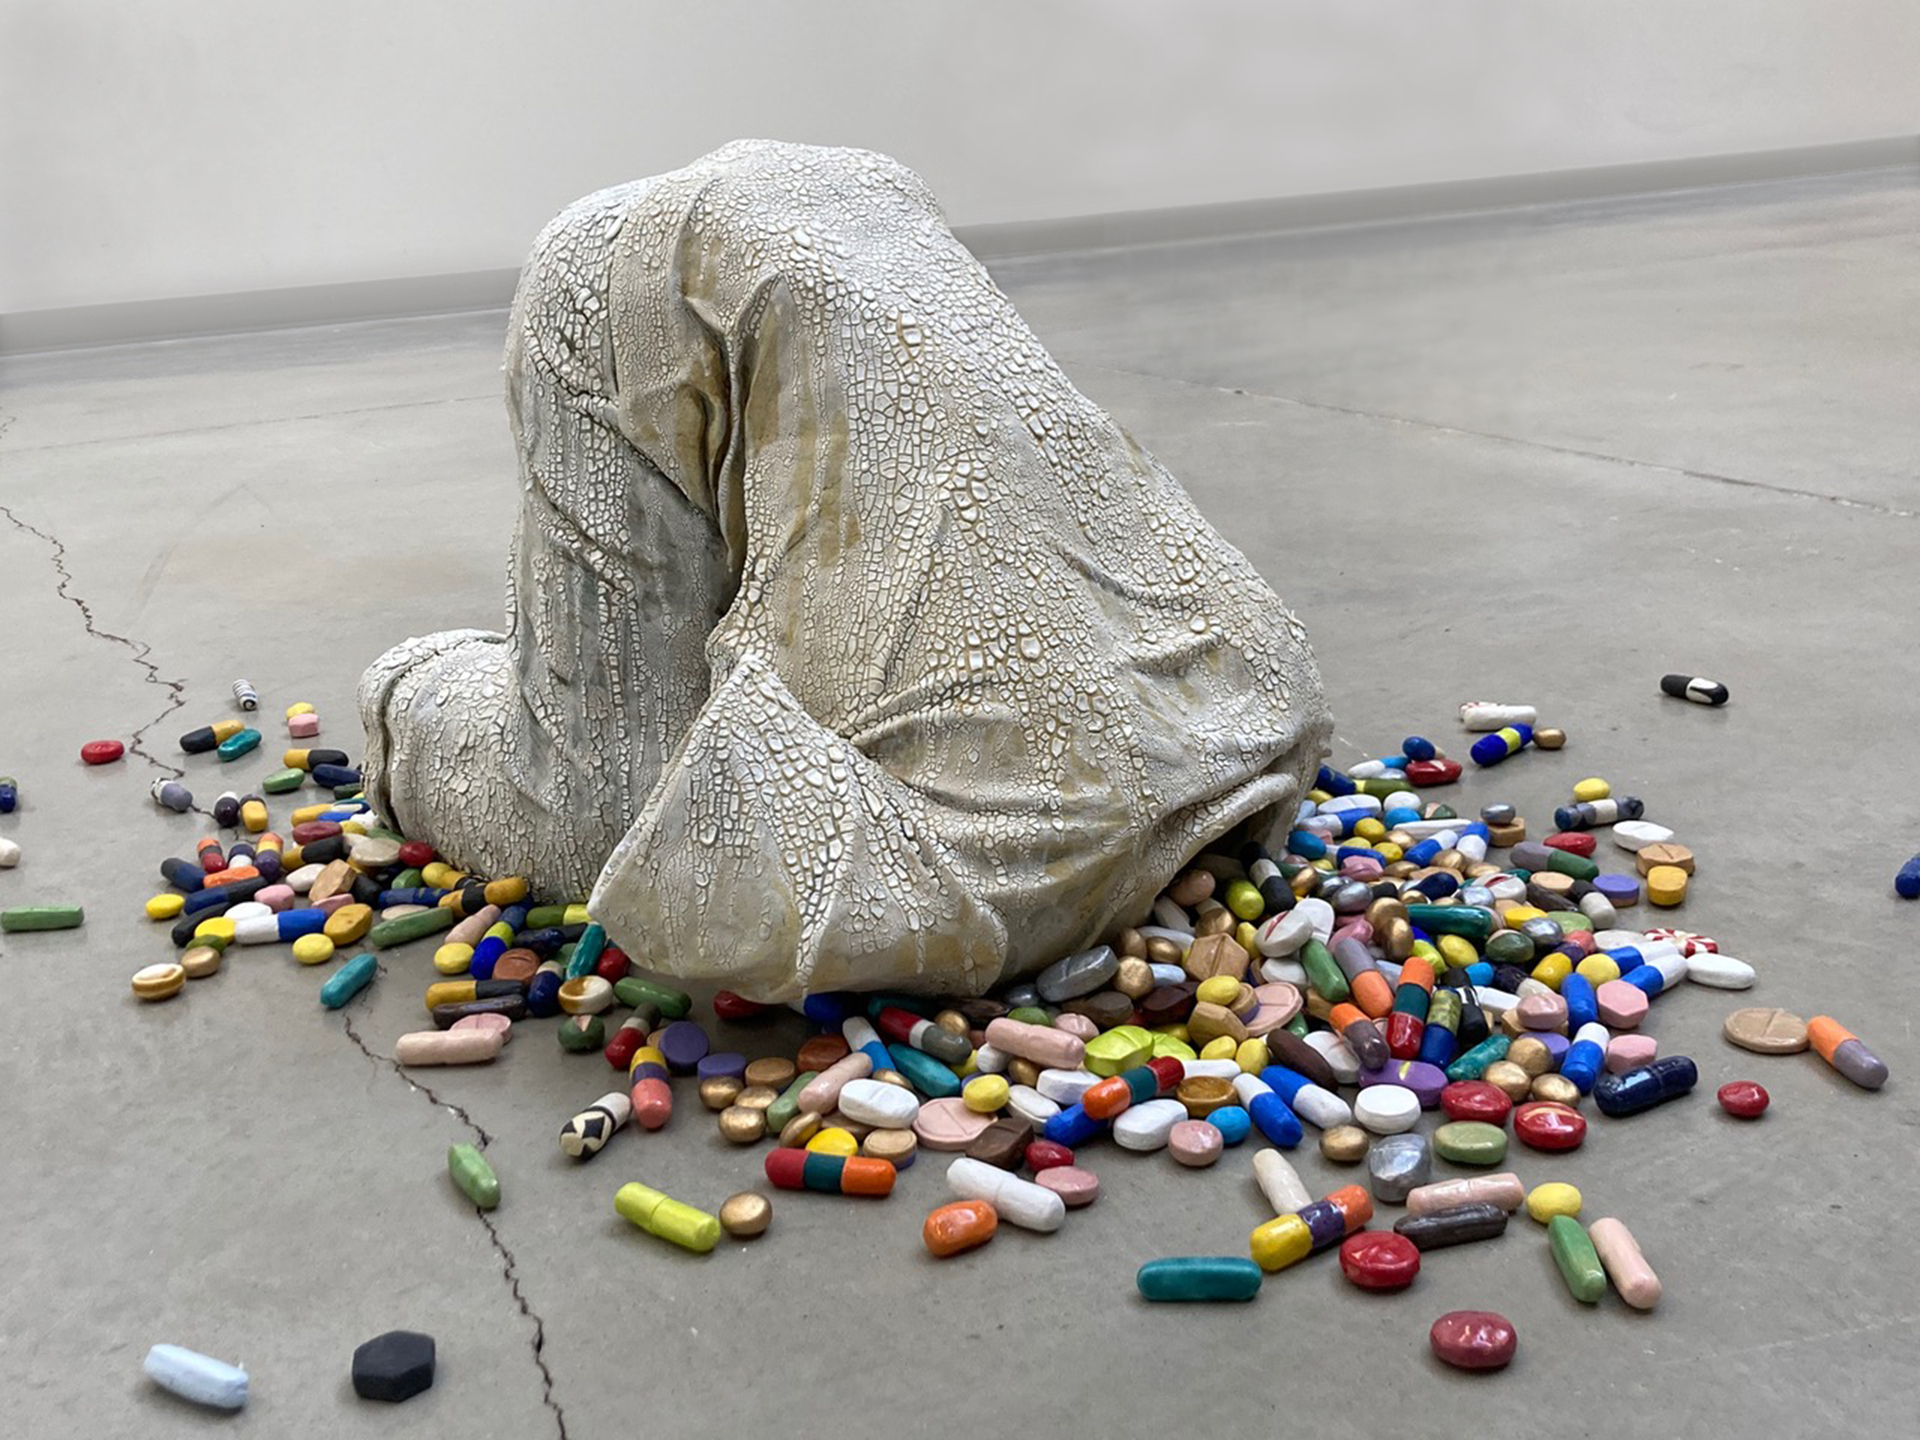 grey sculpture of a person's clothes in the shape of them. It looks like a person on their knees with their torso bent forward so their head would be on the floor except the sculpture only shows how the person's shirt and pants would look if the person were in this position. Various different color, shape and size pills spill out of the neck of the shirt where the person's head would be.